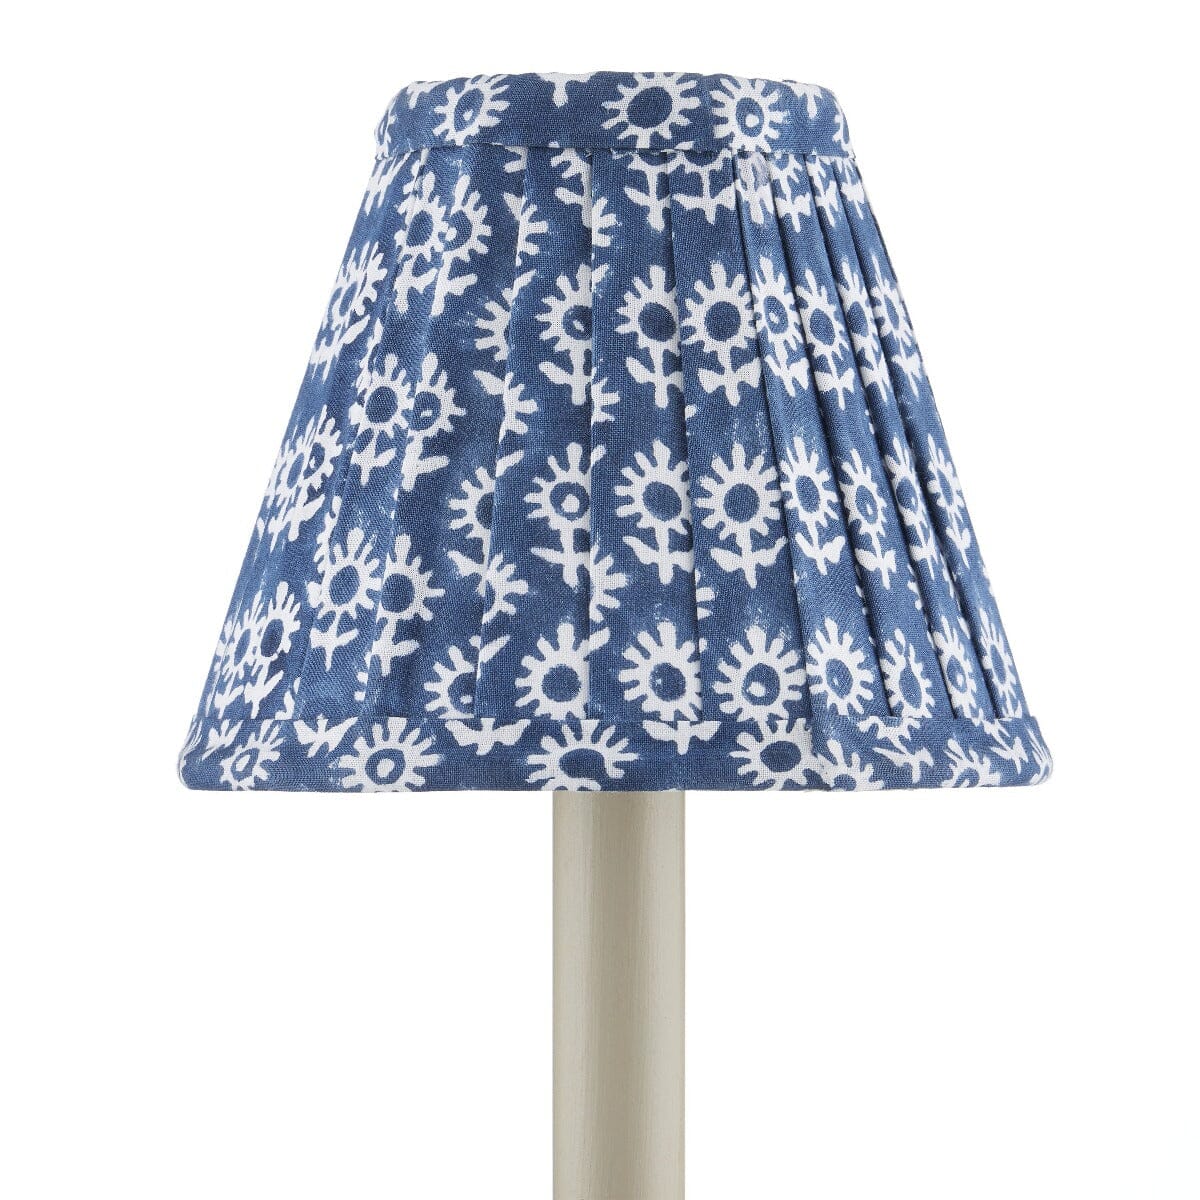 Block Print Pleated Chandelier Shade Navy - Set of 2 Shades 